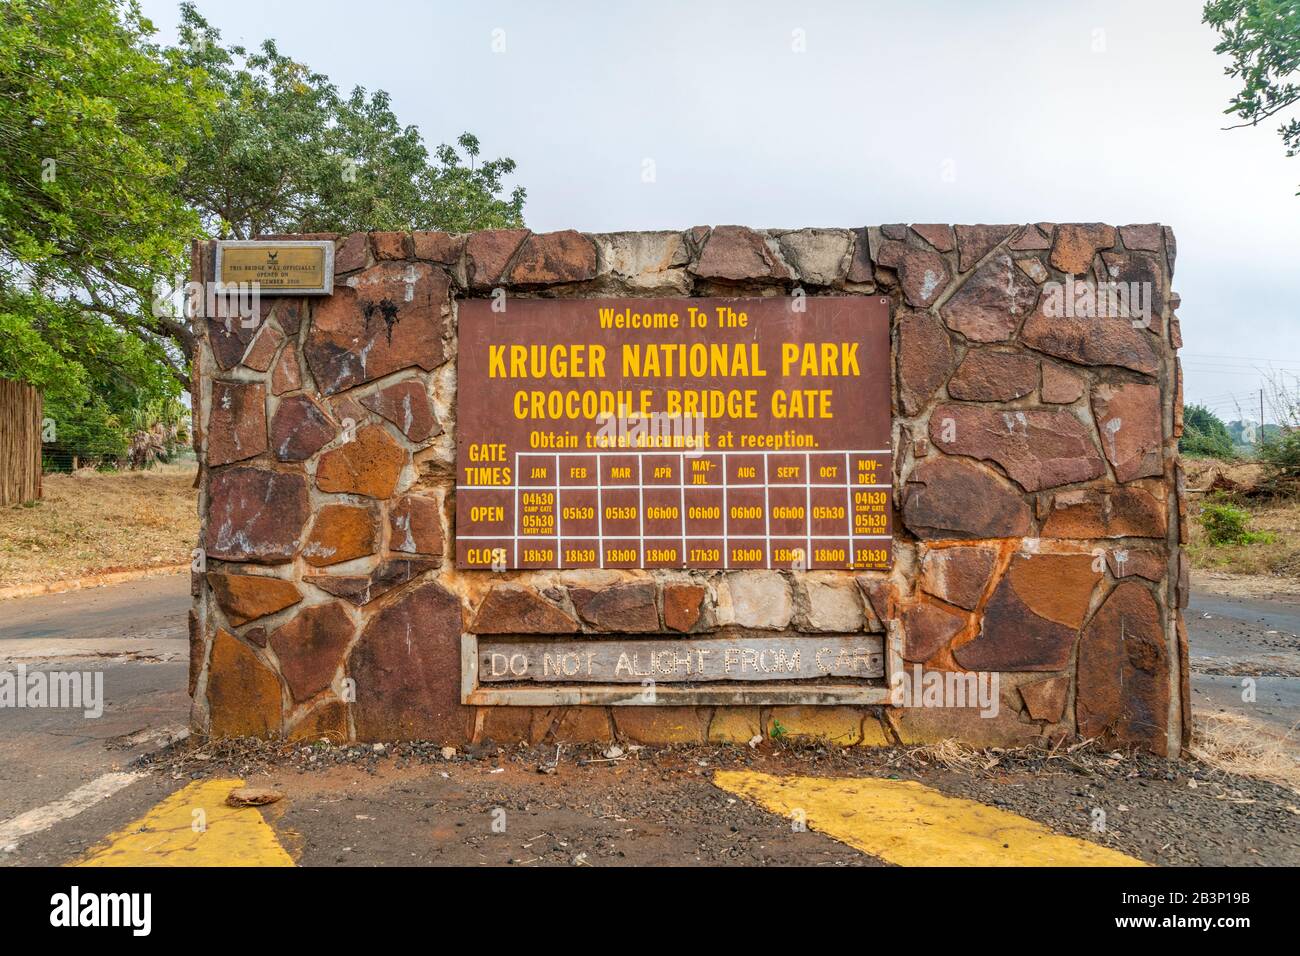 Kruger National Park, South Africa - May 17,2019: Crocodile Bridge Gate with opening hours to Kruger National Park, South Africa Stock Photo